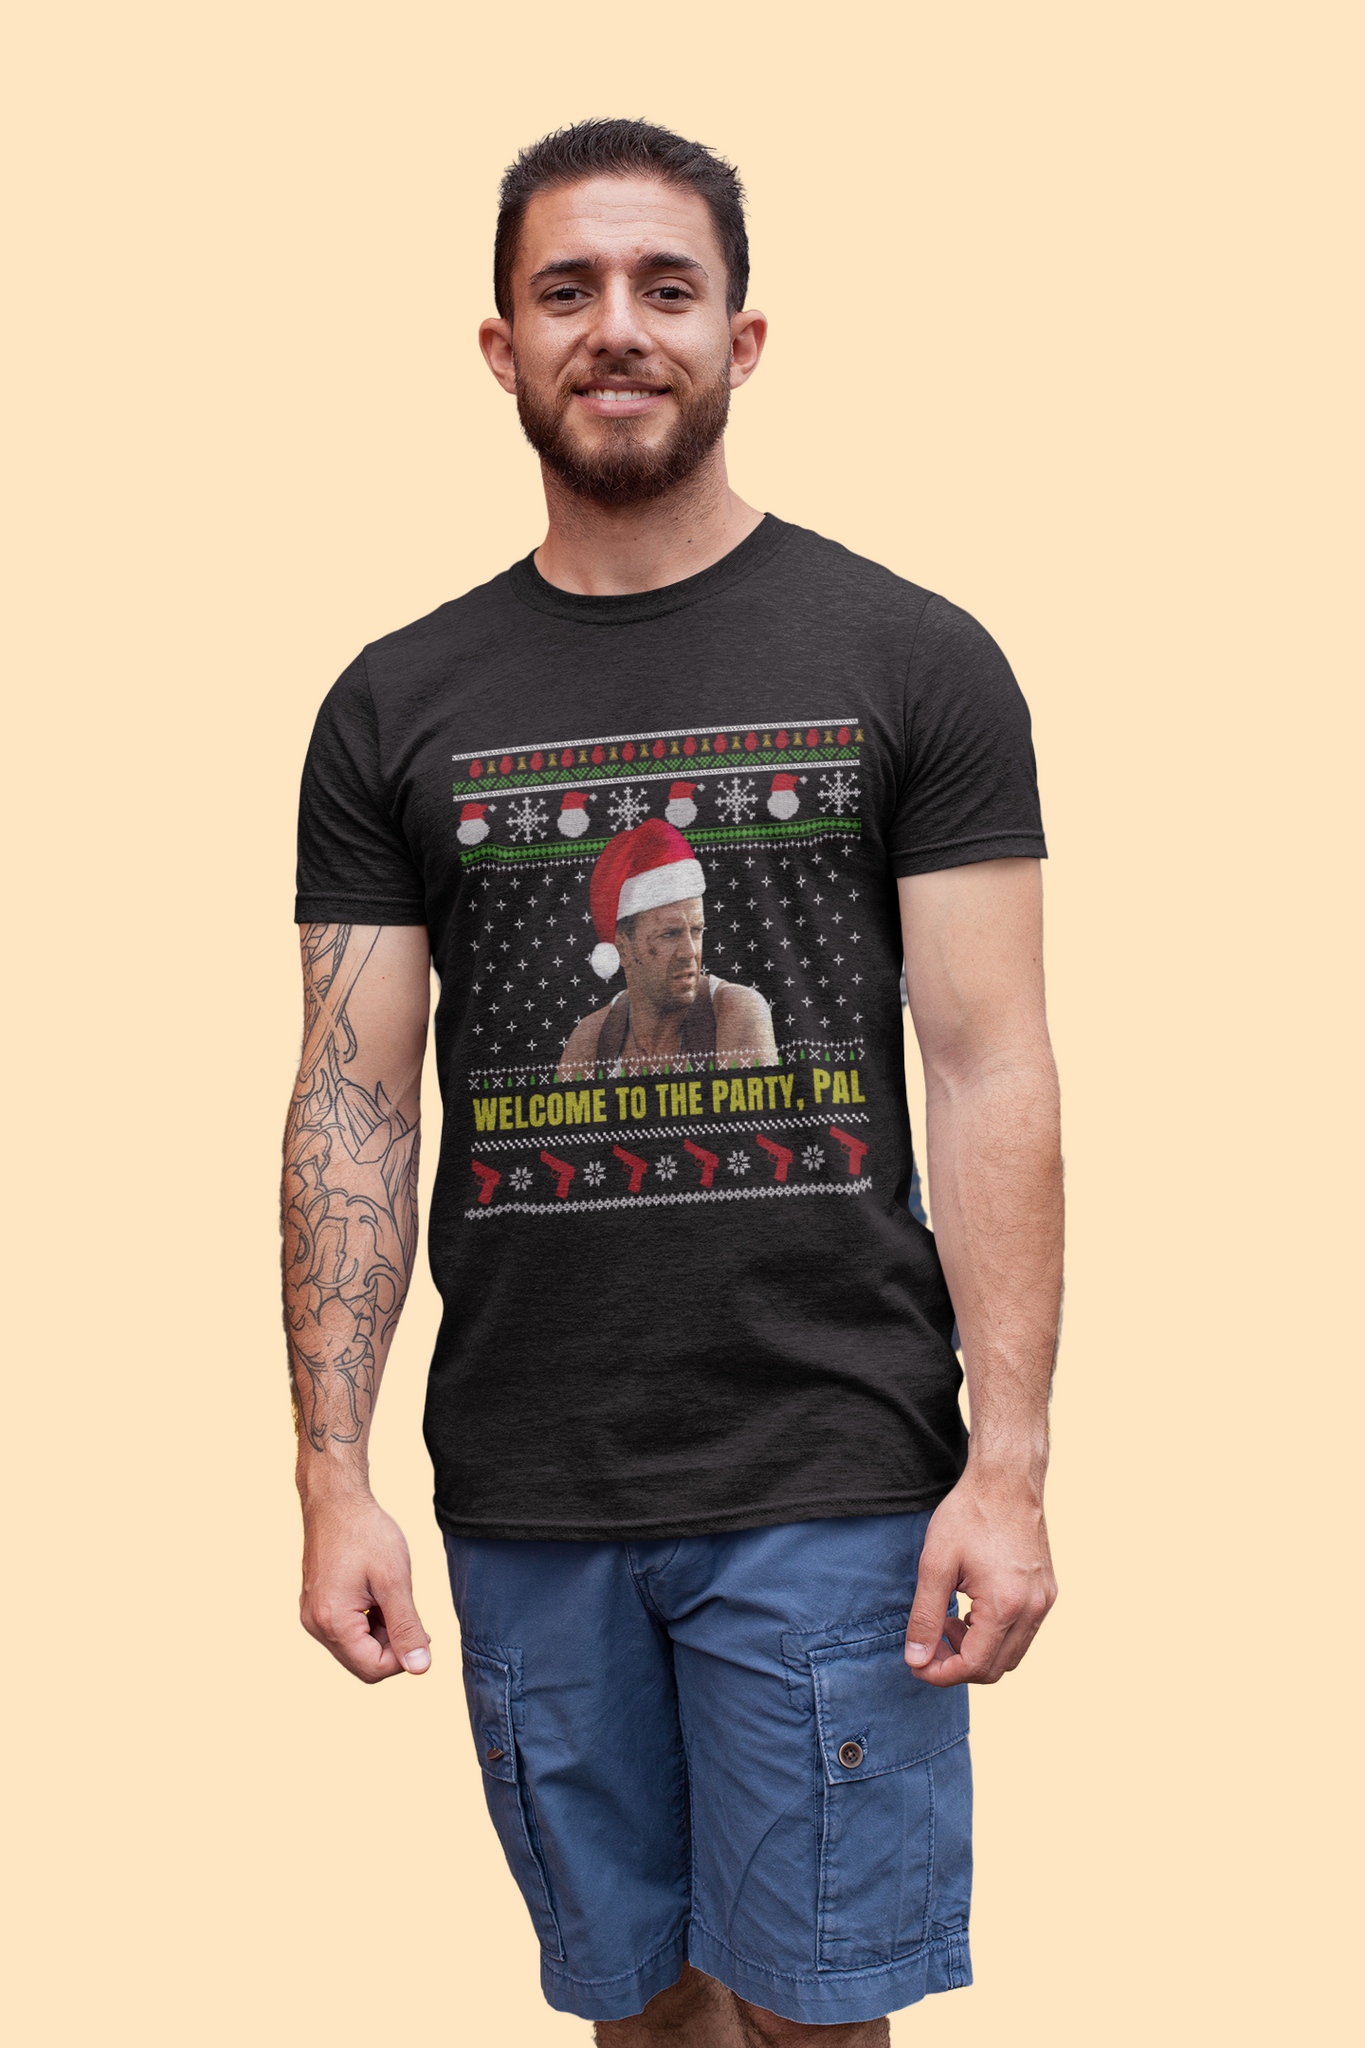 Die Hard Ugly Sweater Shirt, John McClane Tshirt, Welcome To The Party Pal T Shirt, Christmas Gifts